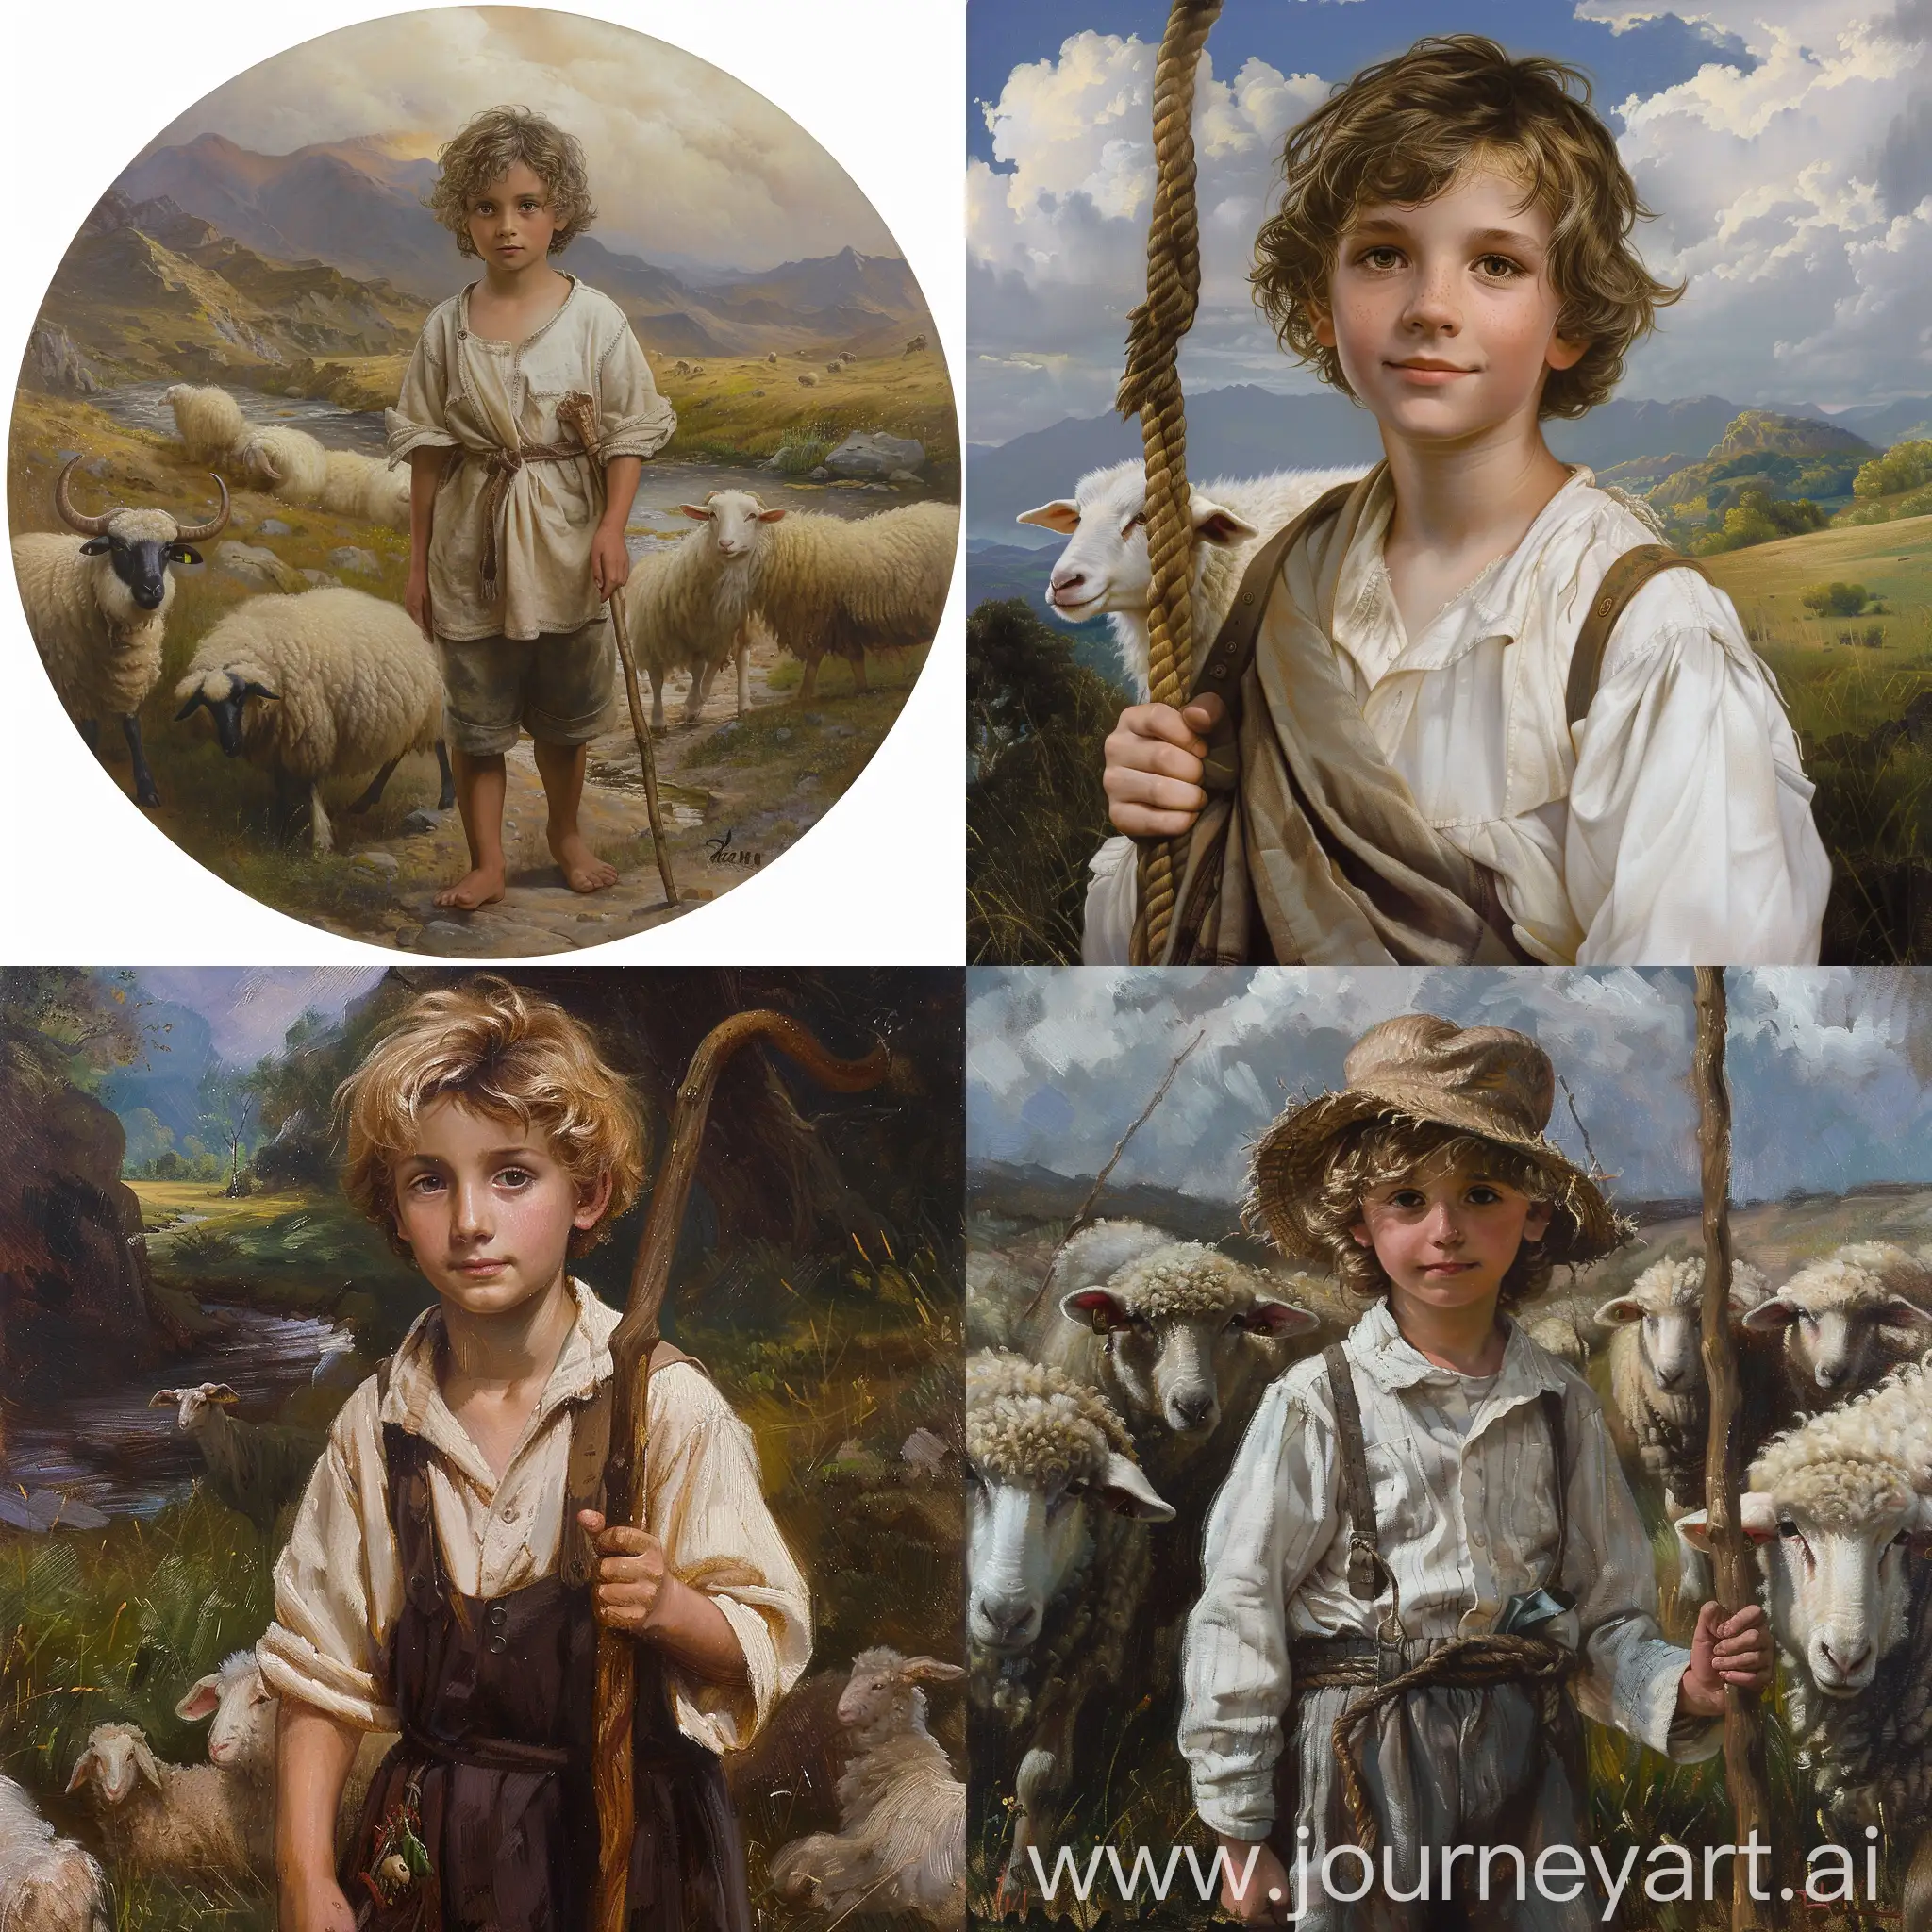 David-the-Shepherd-Boy-with-His-Sheep-in-Serene-Landscape